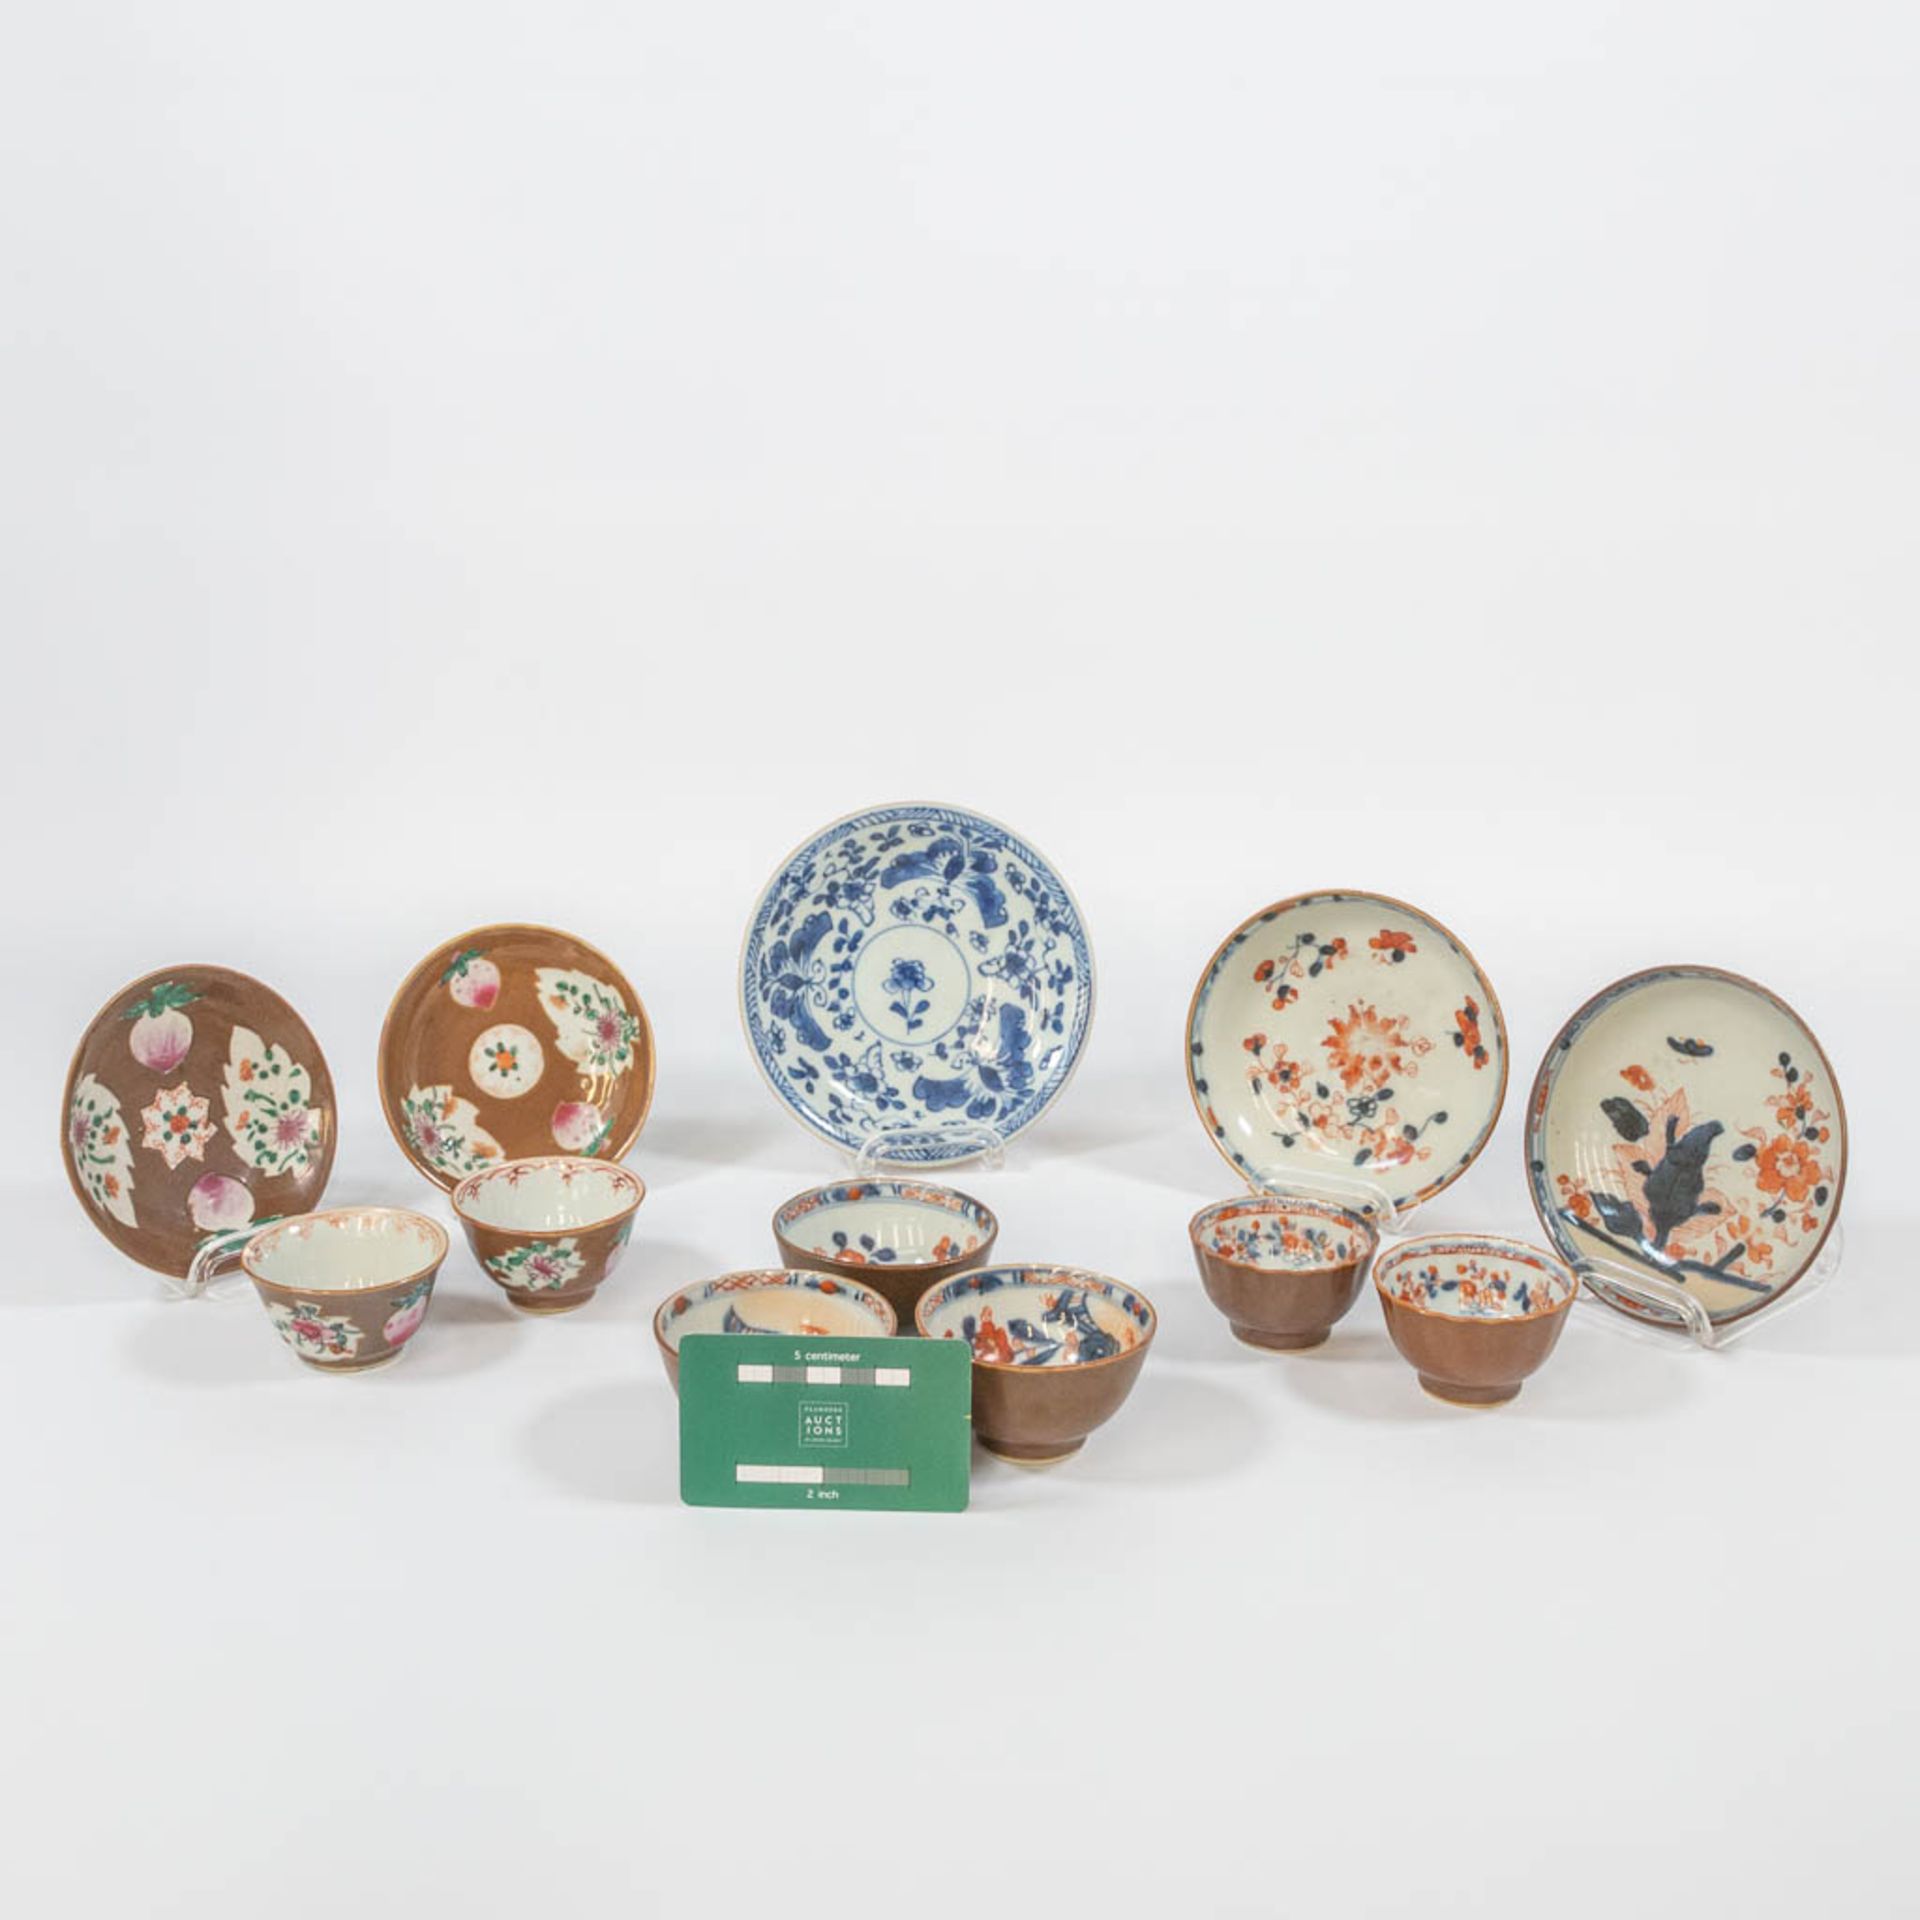 A collection of 12 Capucine Chinese porcelain items, consisting of 5 plates and 7 cups. - Image 5 of 26